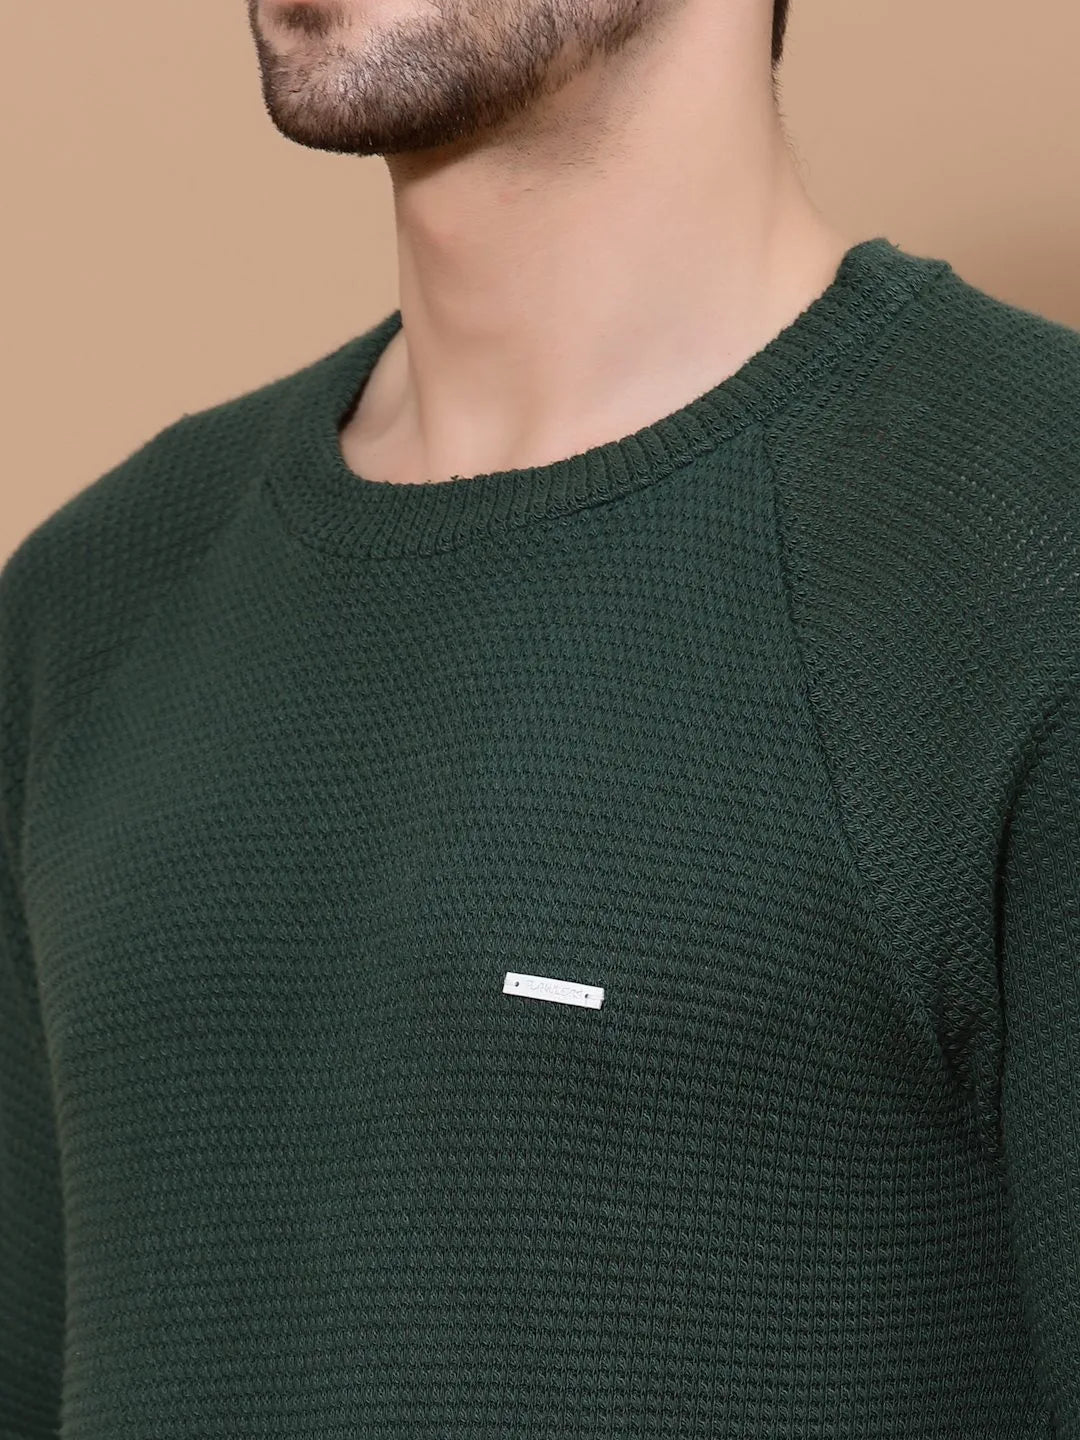 Flawless Men Green Knitted Sweater